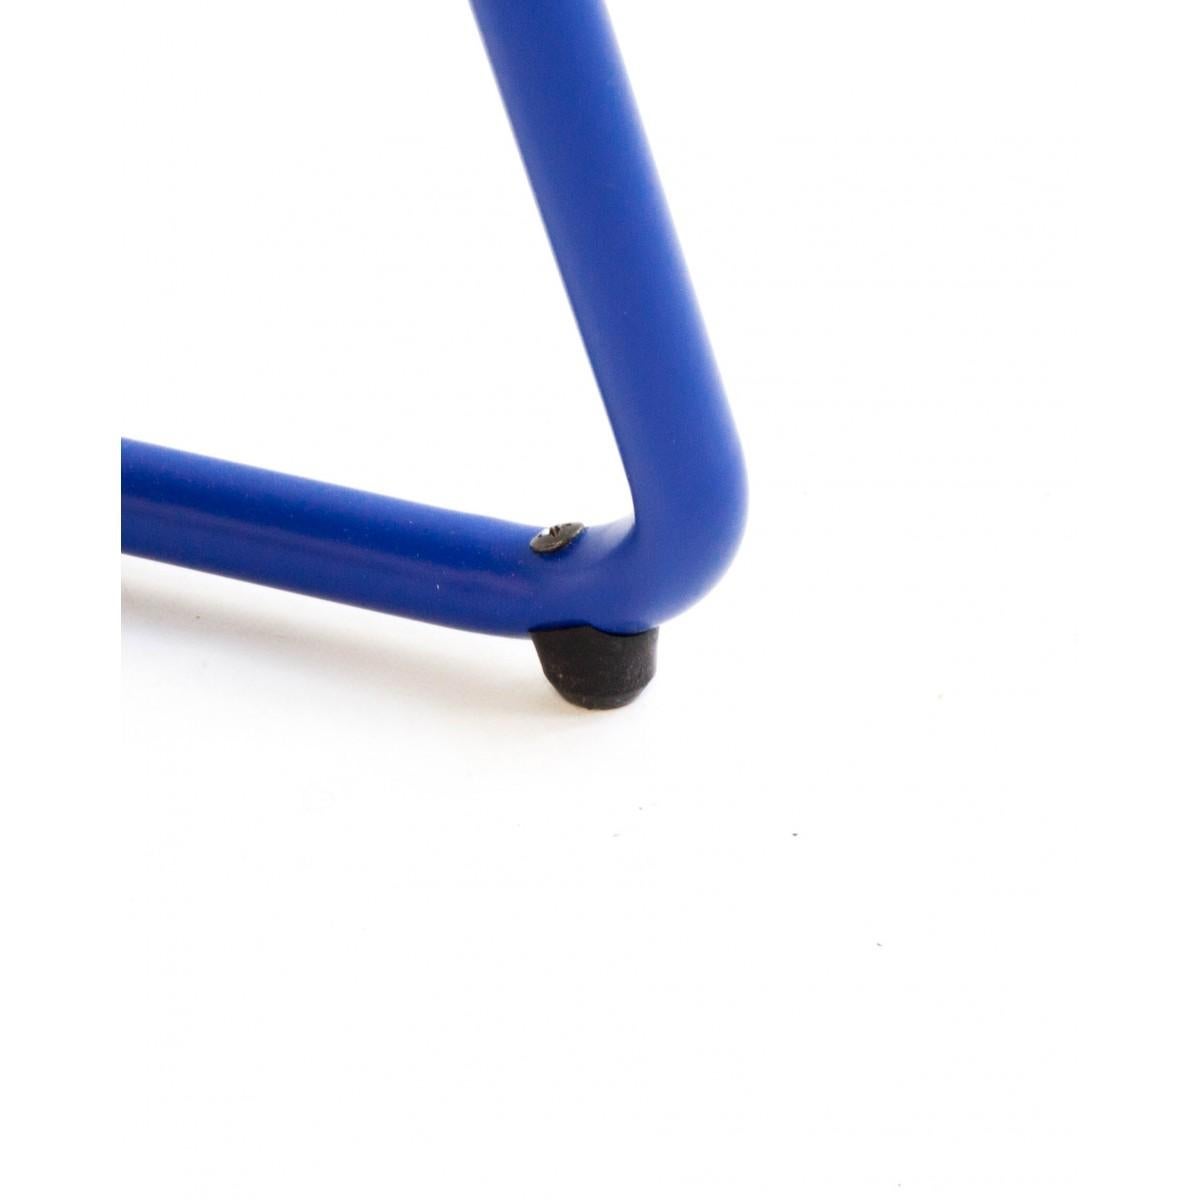 New Folding Iron Chair Blue 5002 by Houtique  1